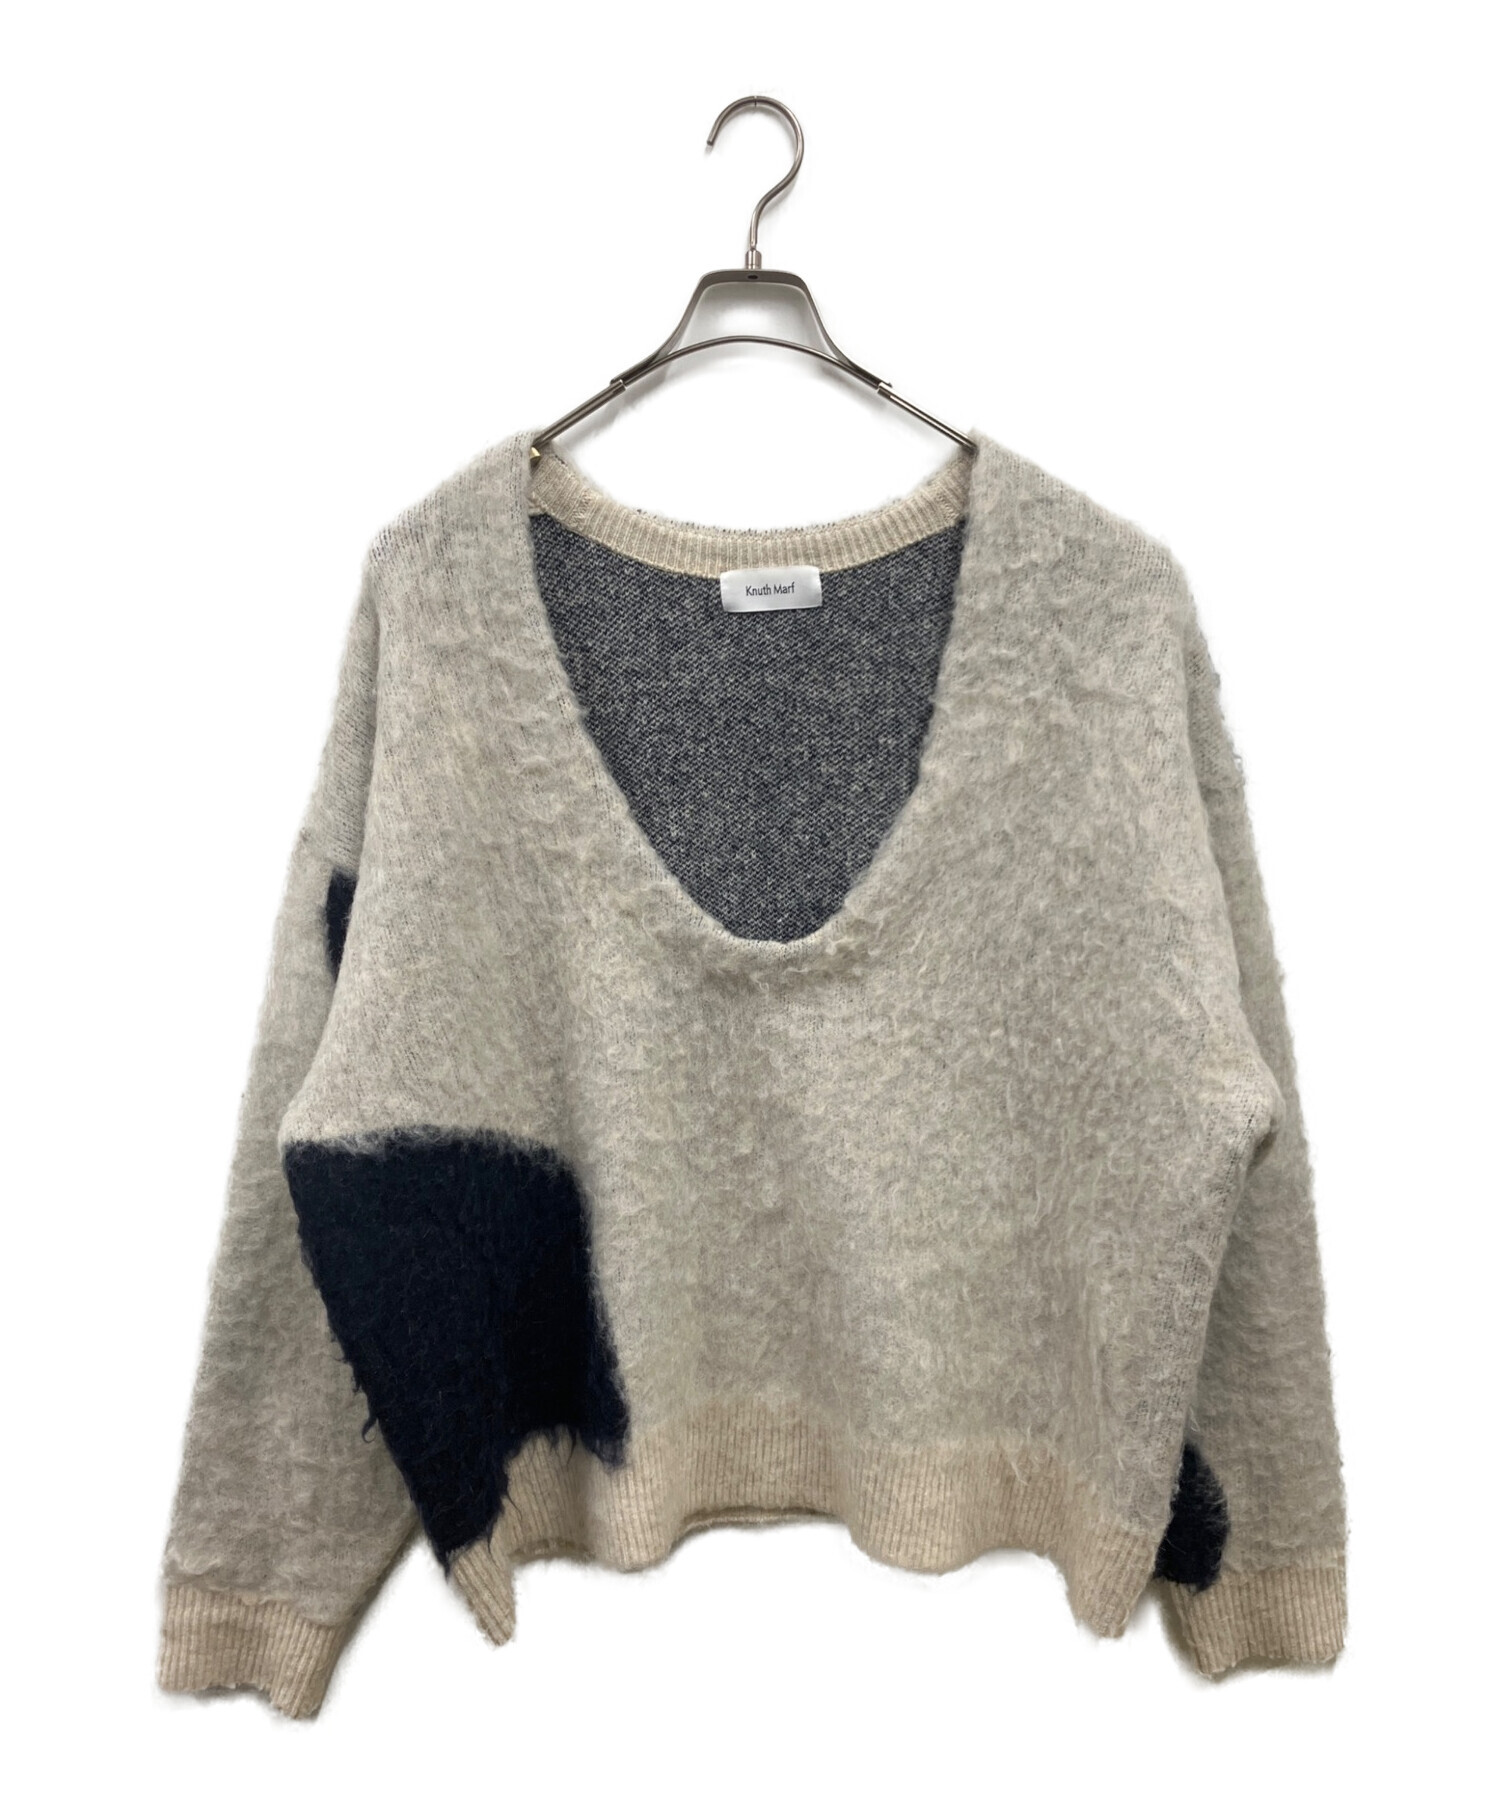 knuth marf (クヌースマーフ) Uneck knit pullover/KM22AG09 ベージュ サイズ:FREE